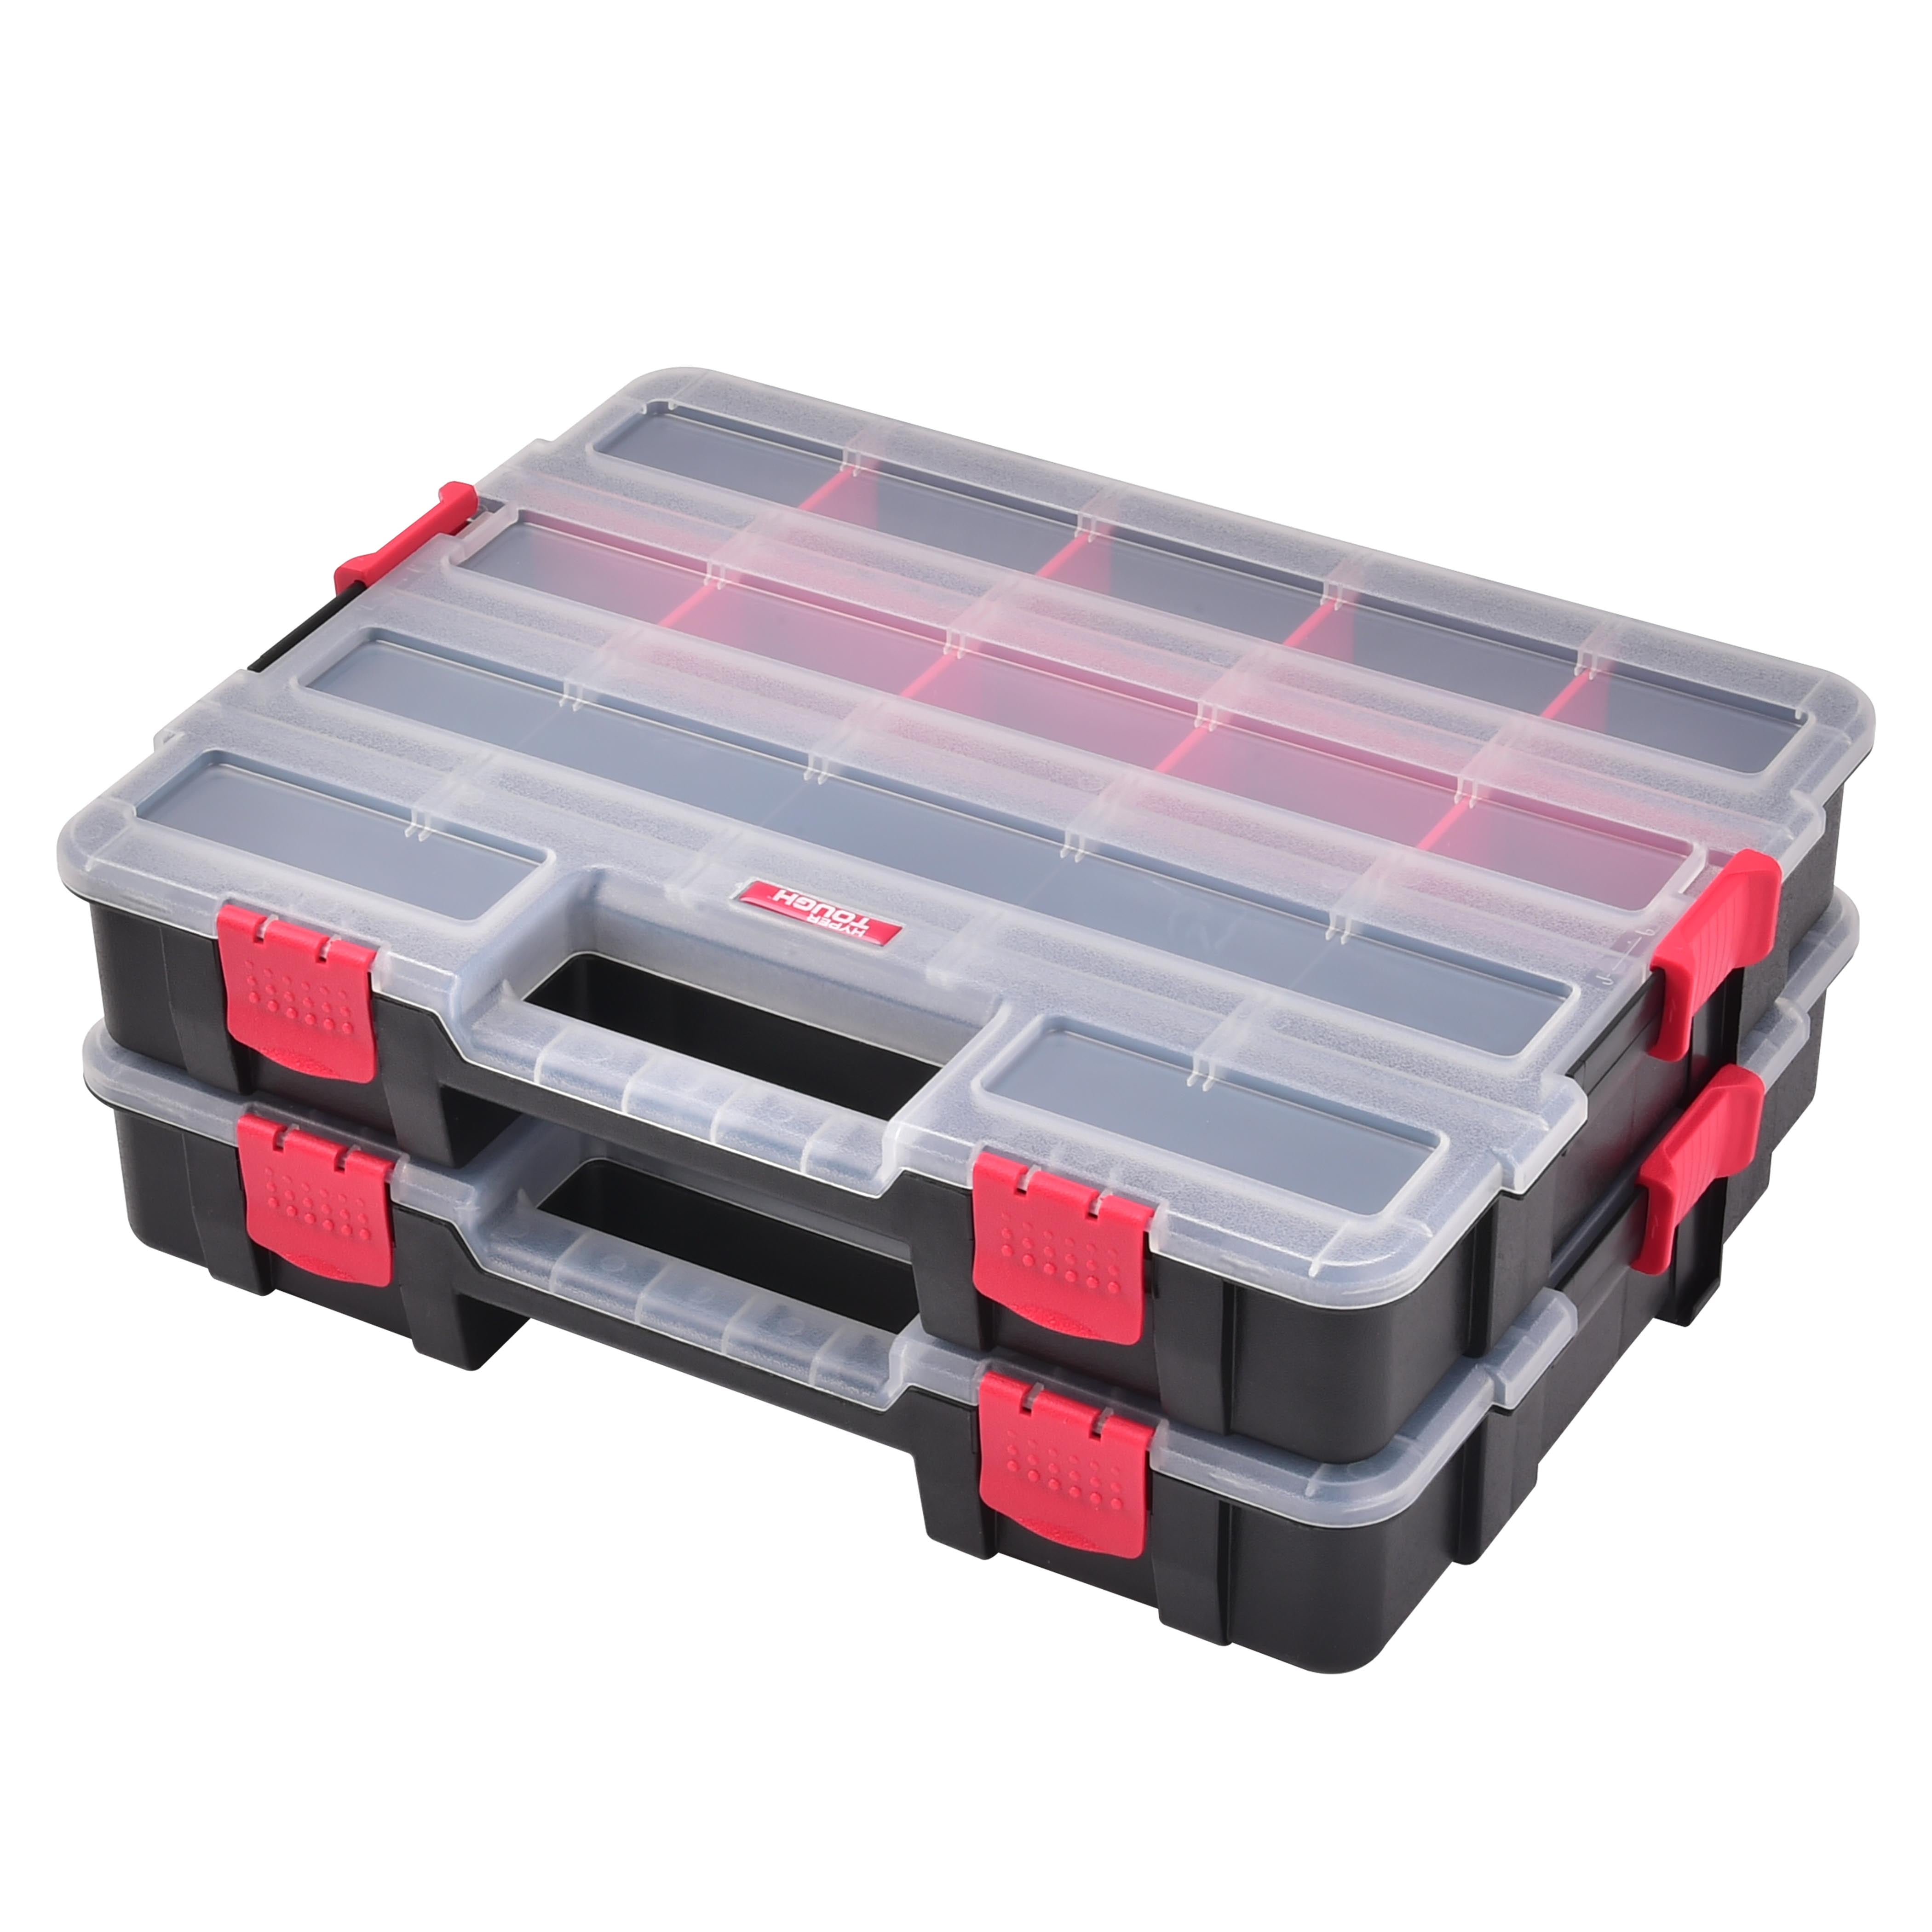 STACK-ON Storage 15 Compartment Organizer Tools Nuts Bolts Sew Coins Legos Toys 